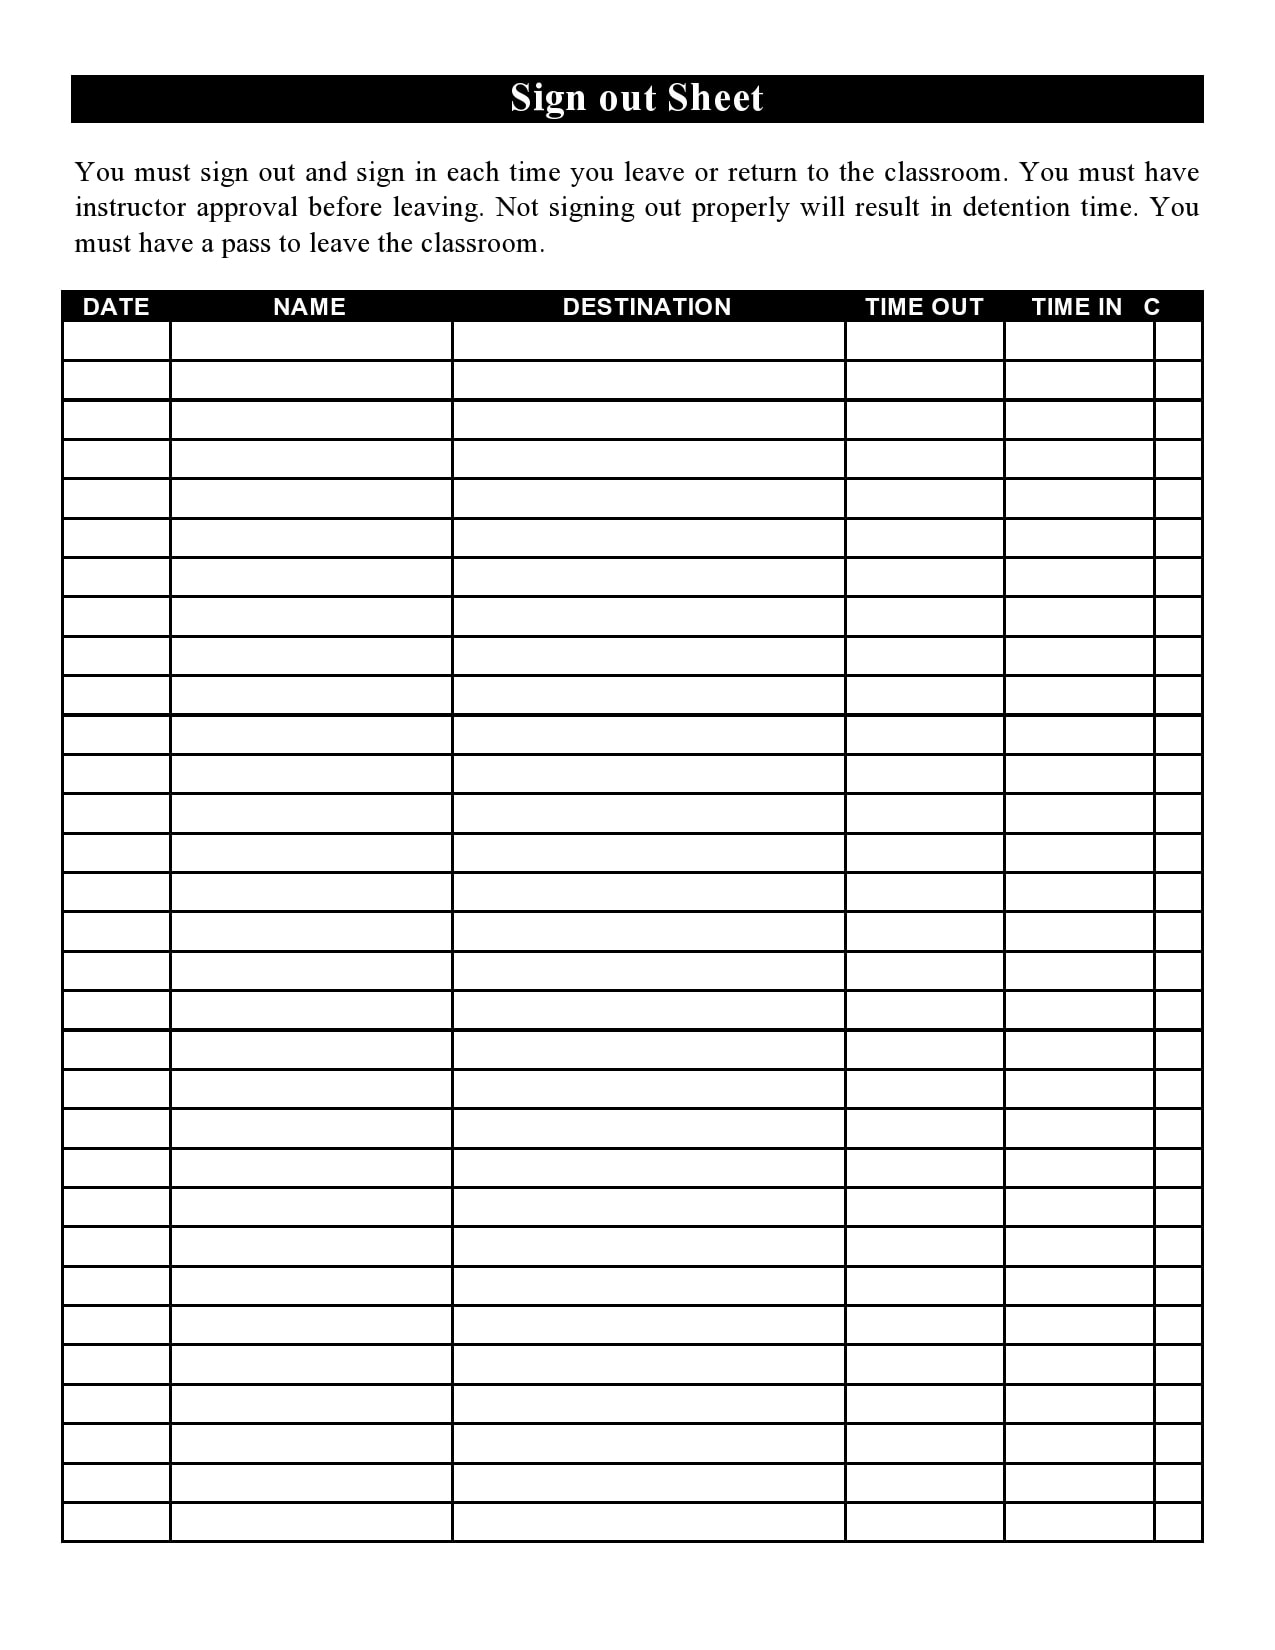 Sign In And Out Sheet Printable